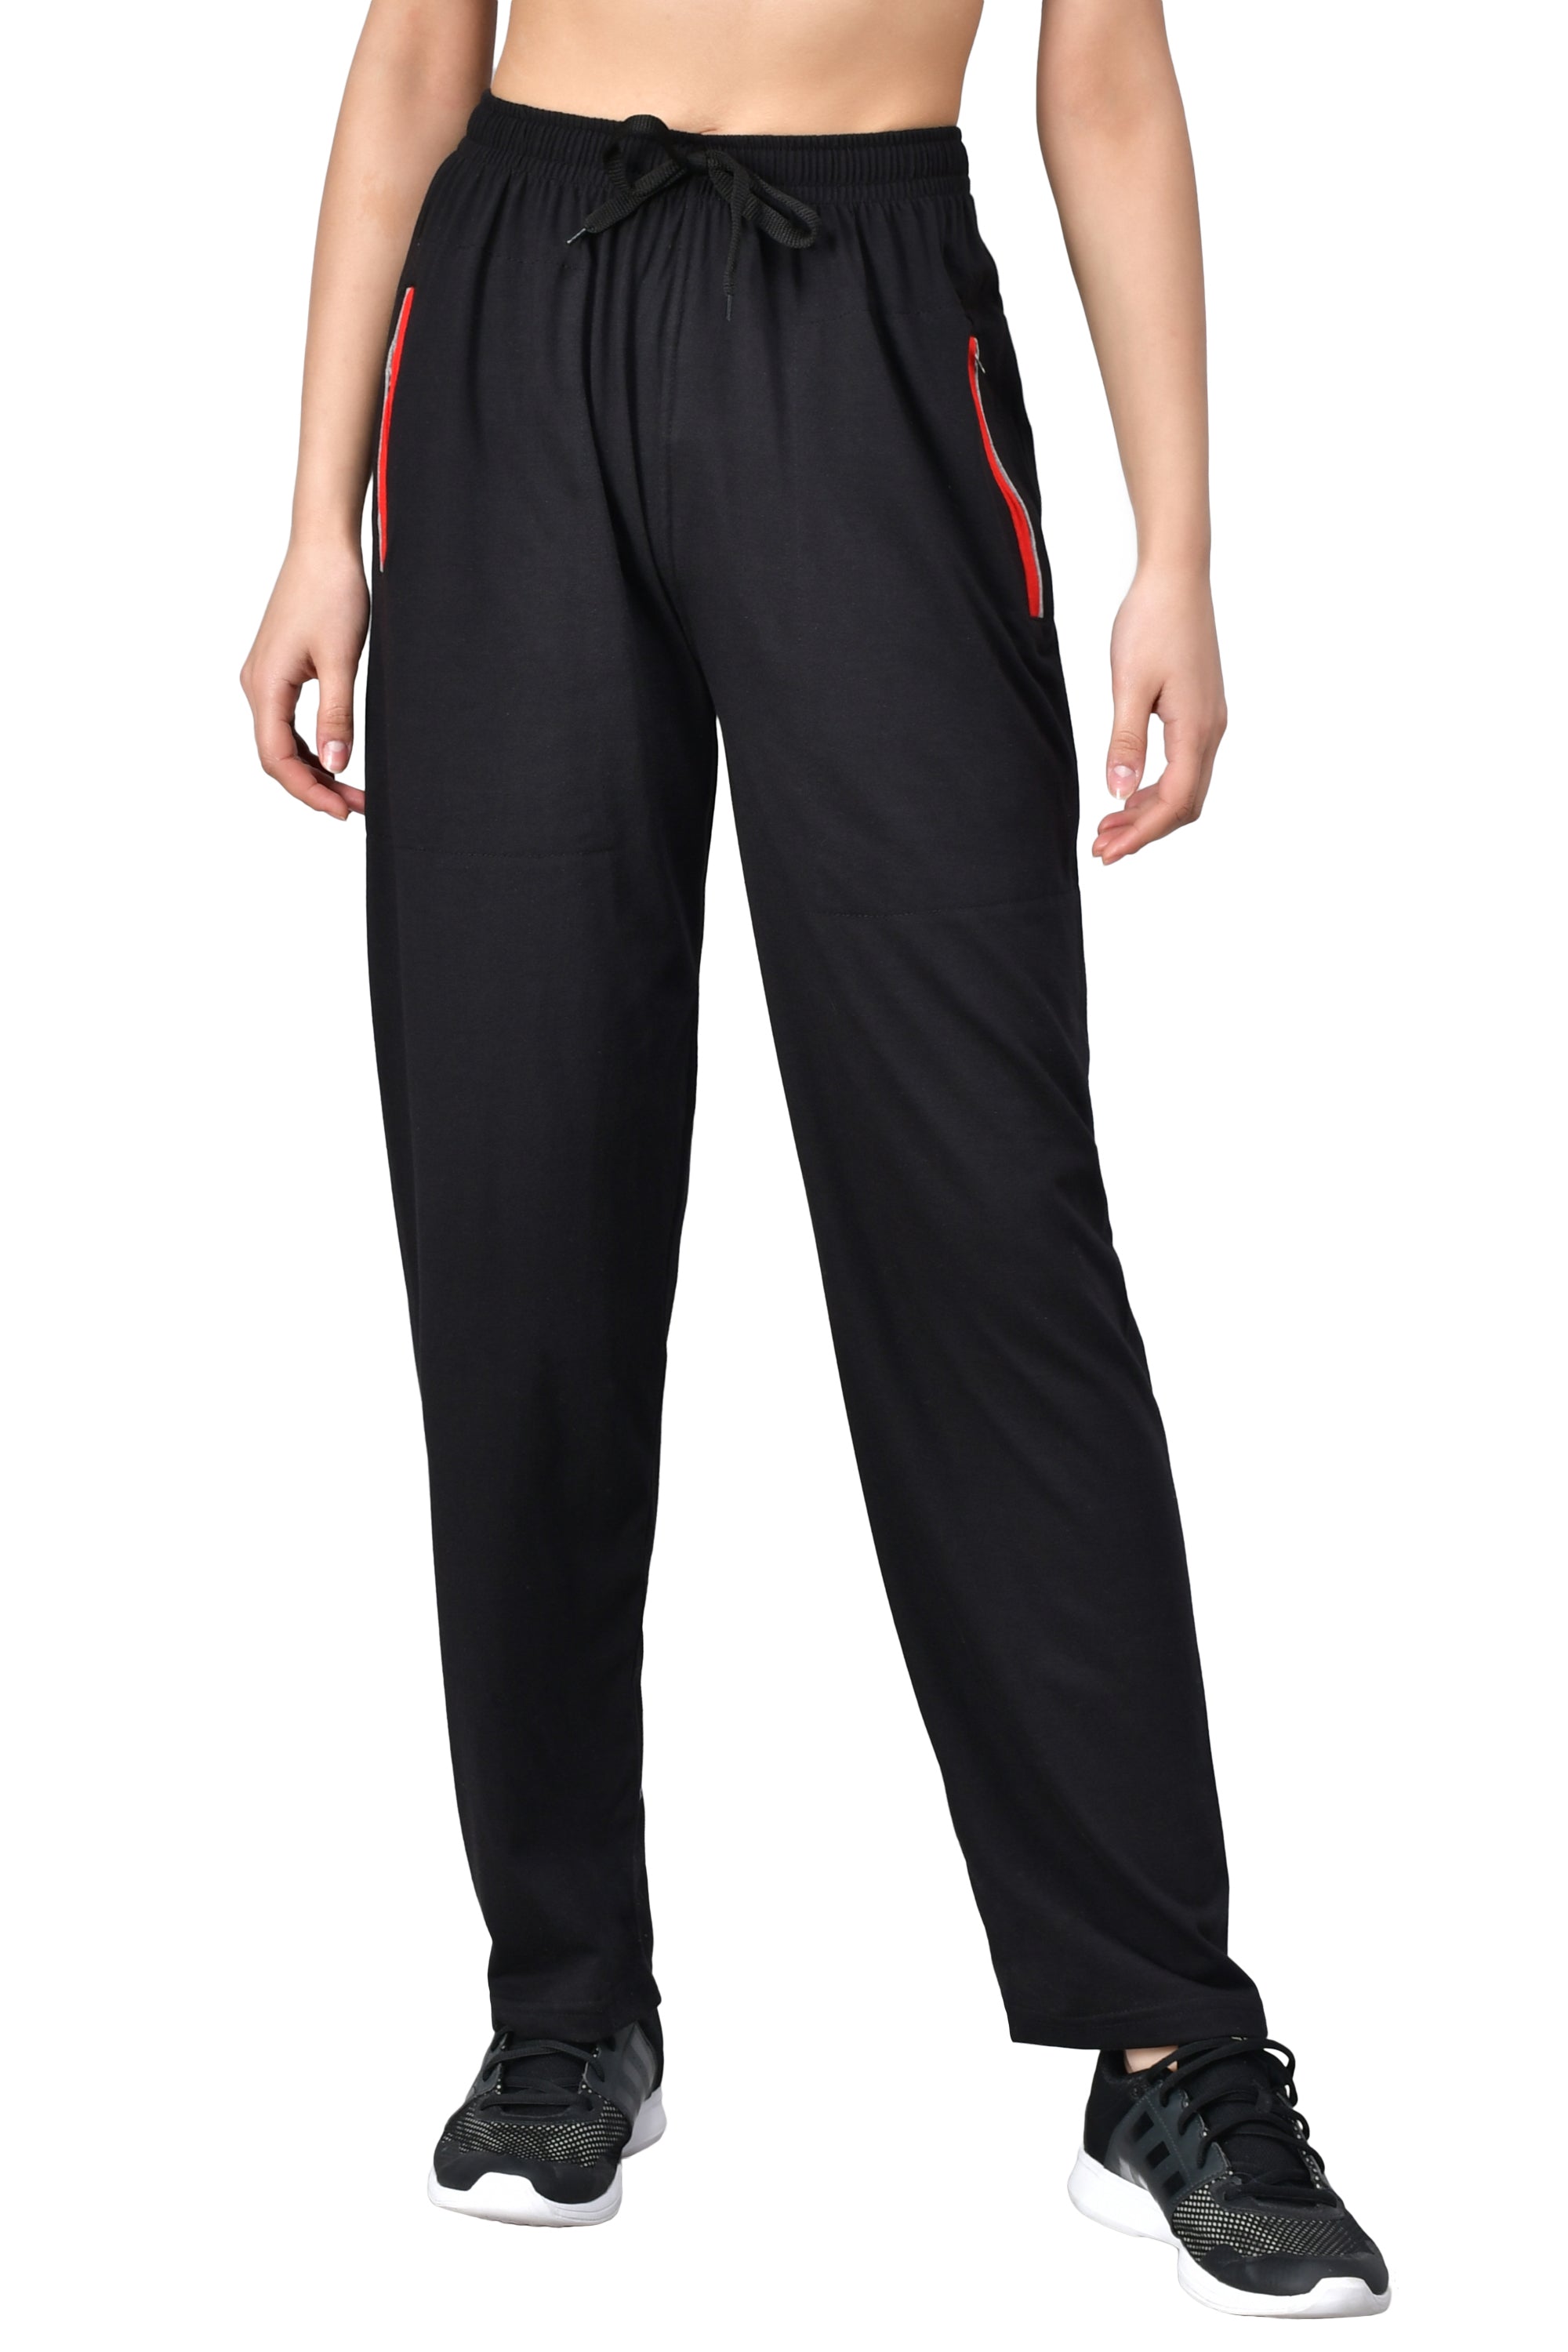 Lavenicole Men's Lightweight Athletic Pants with Indonesia | Ubuy